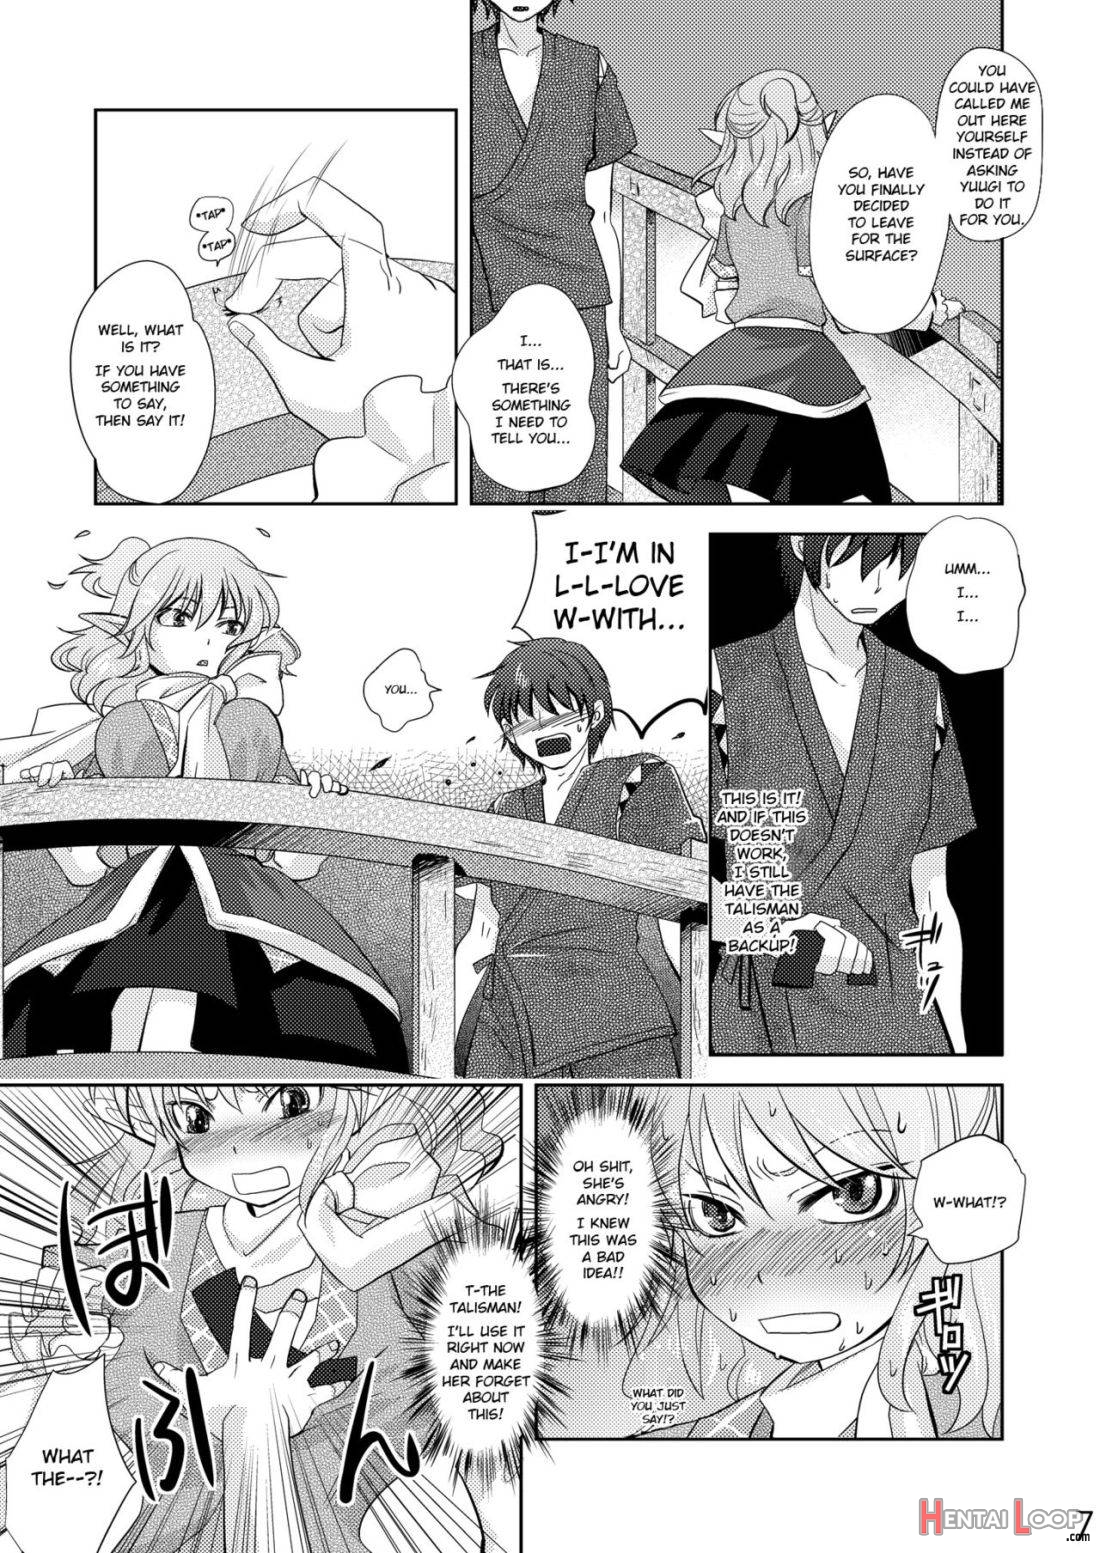 Opparusui page 5